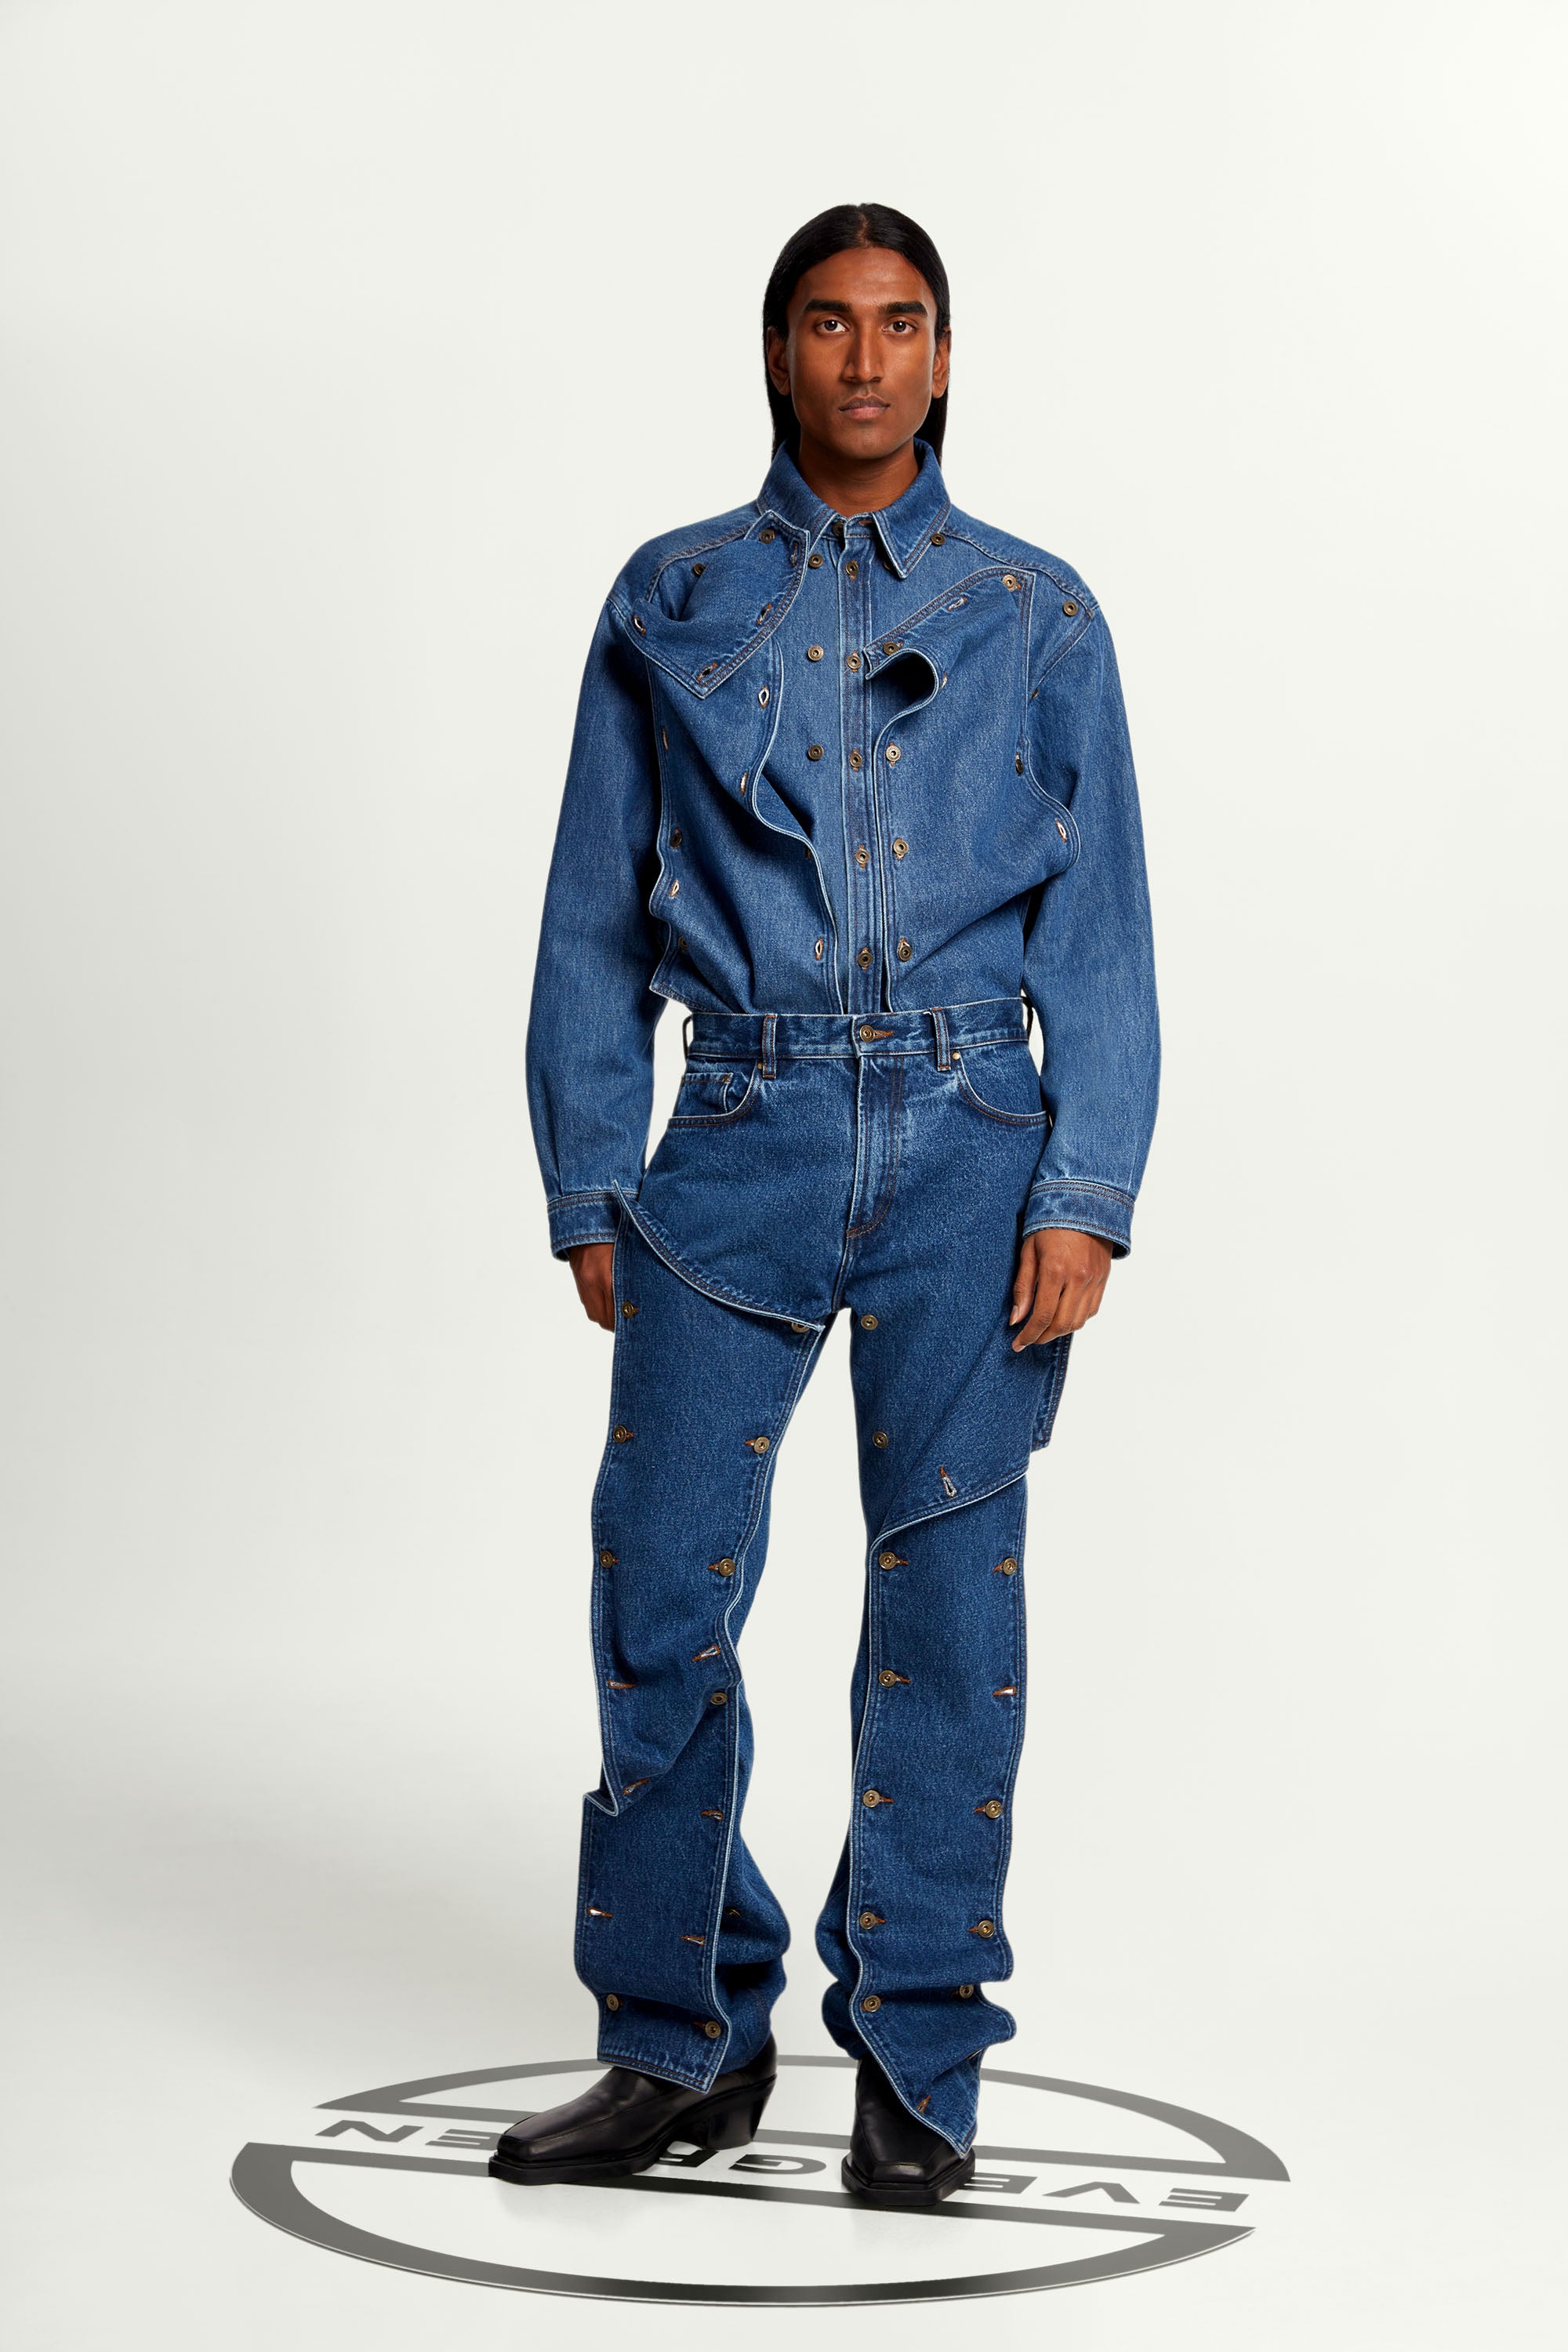 Yproject 21aw button pannel jeans